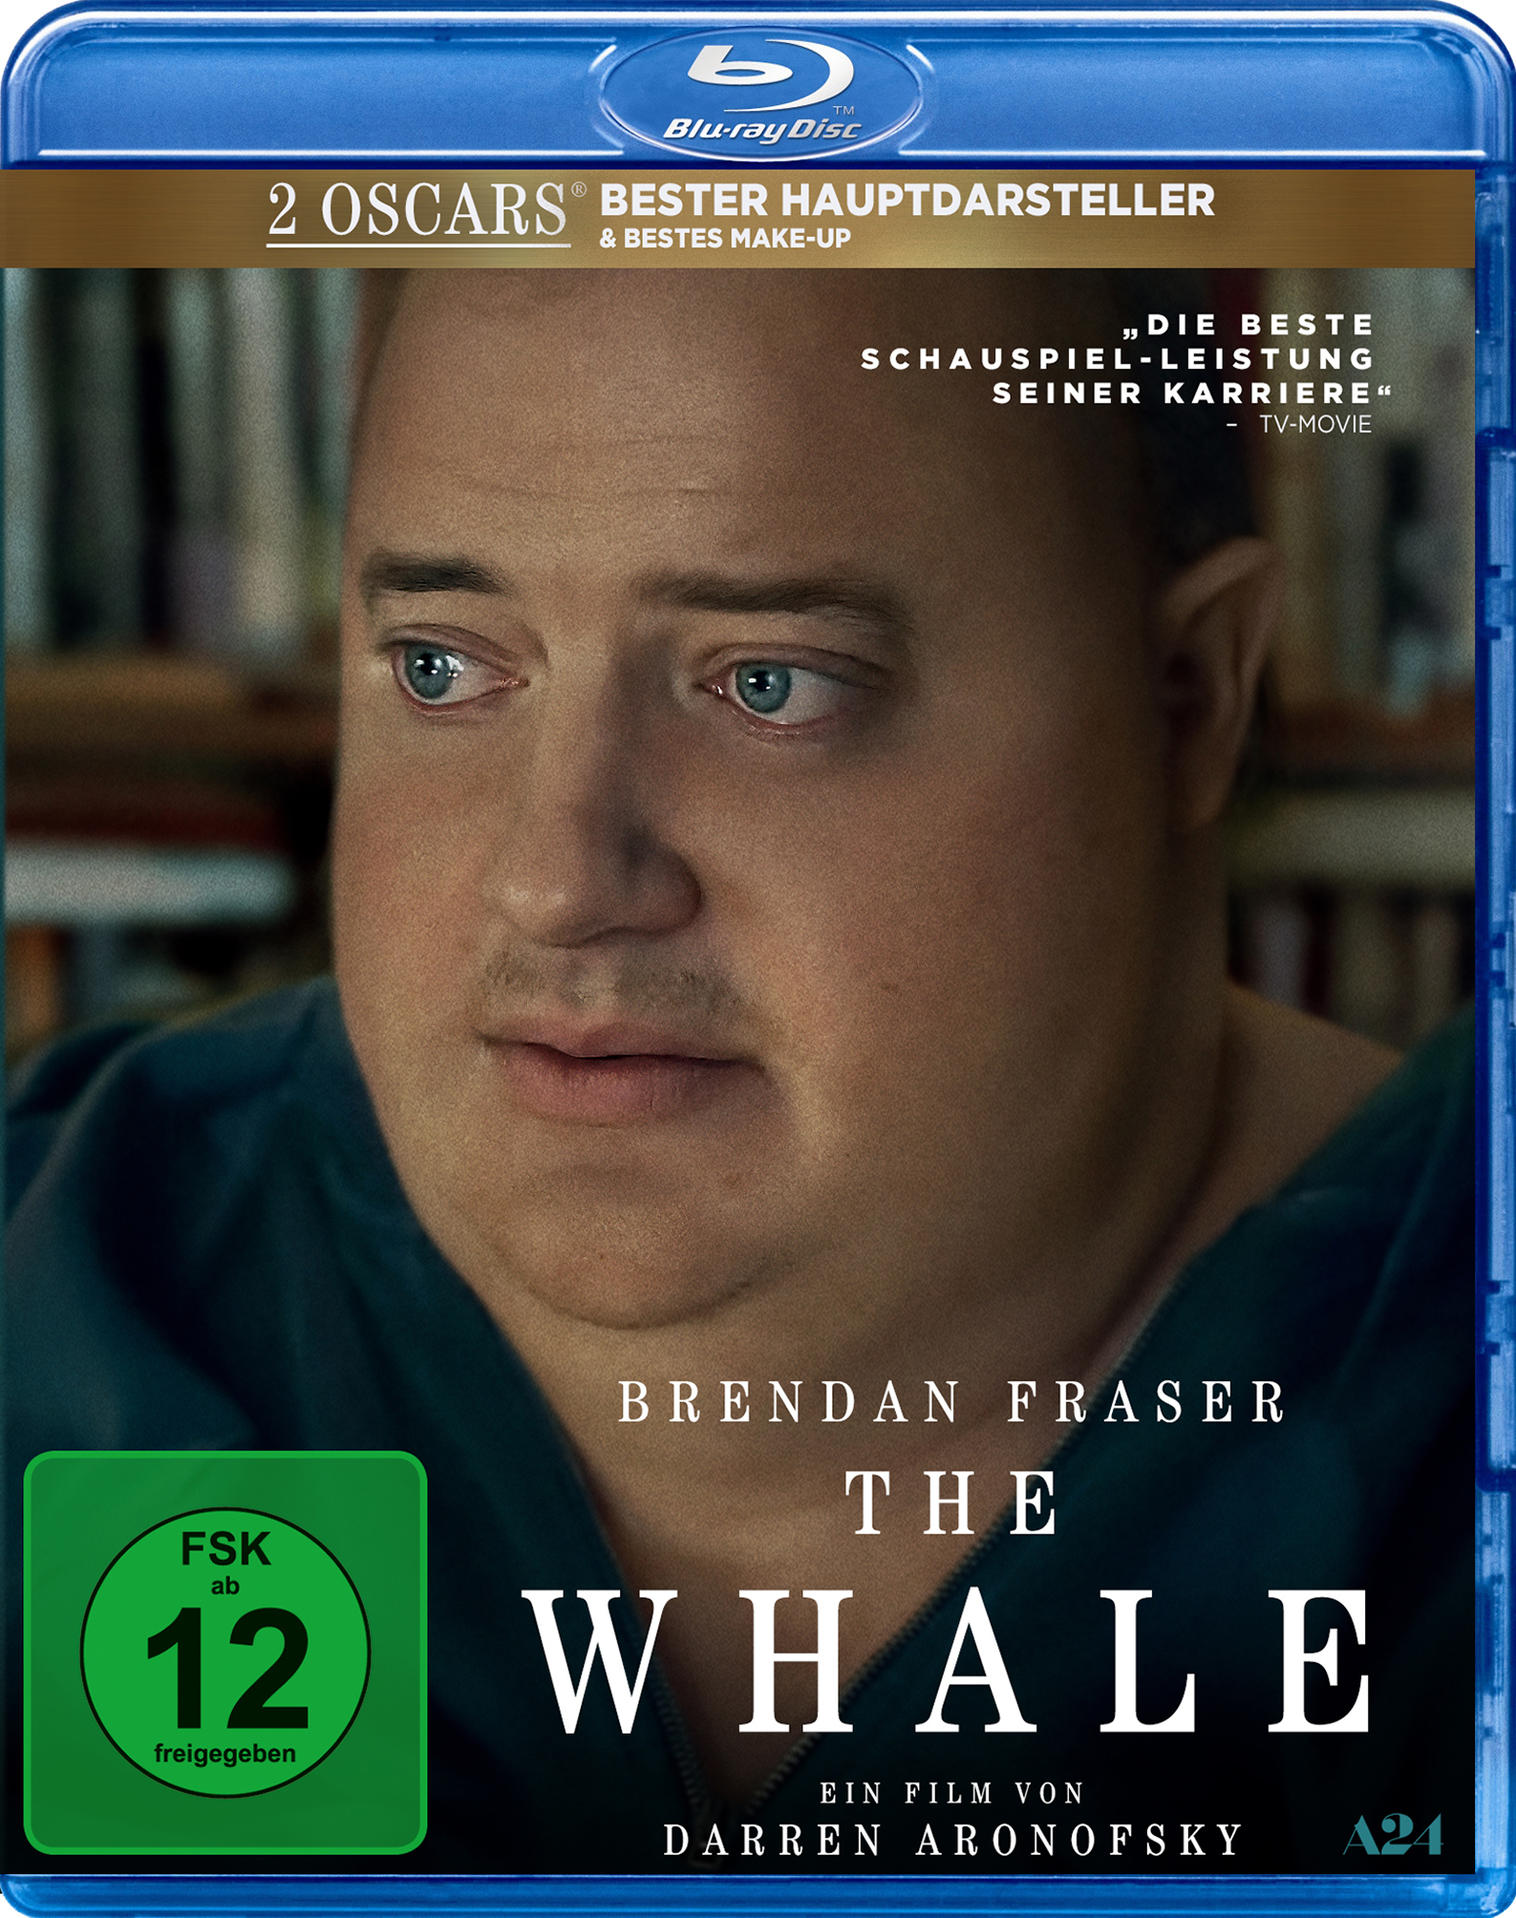 The Blu-ray Whale